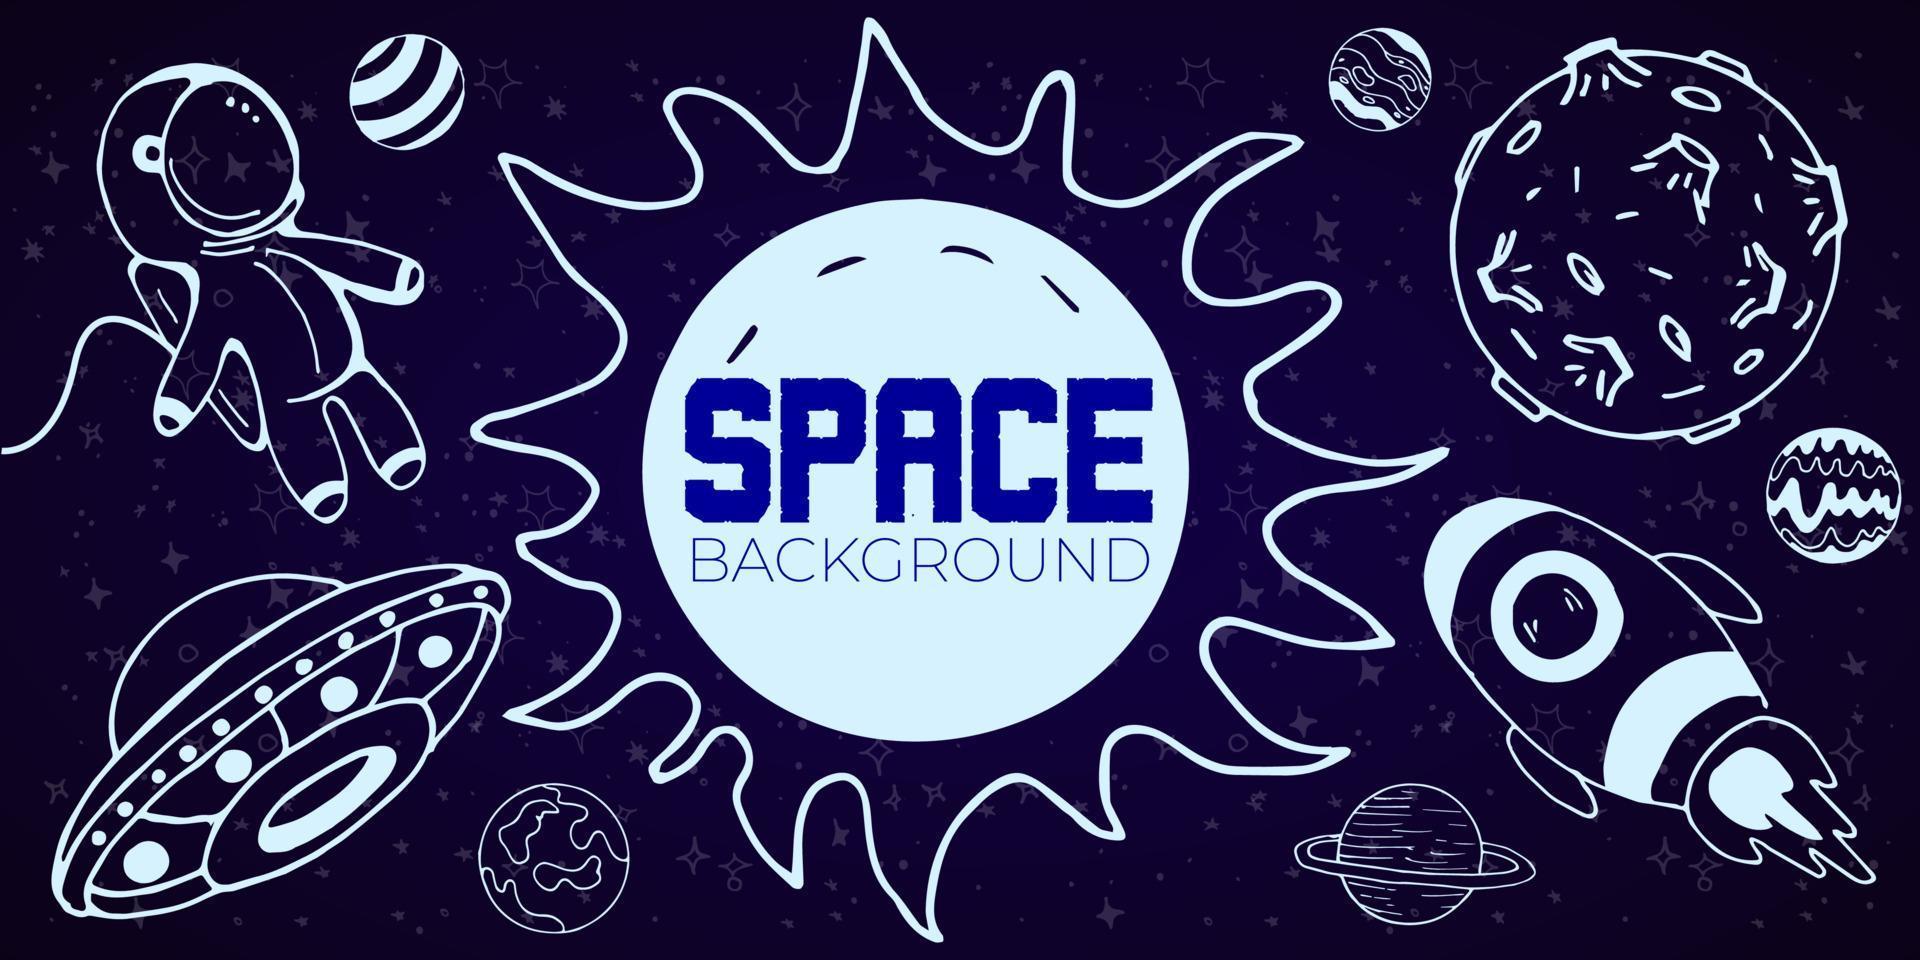 Space Vector Hand Drawn Abstract Background